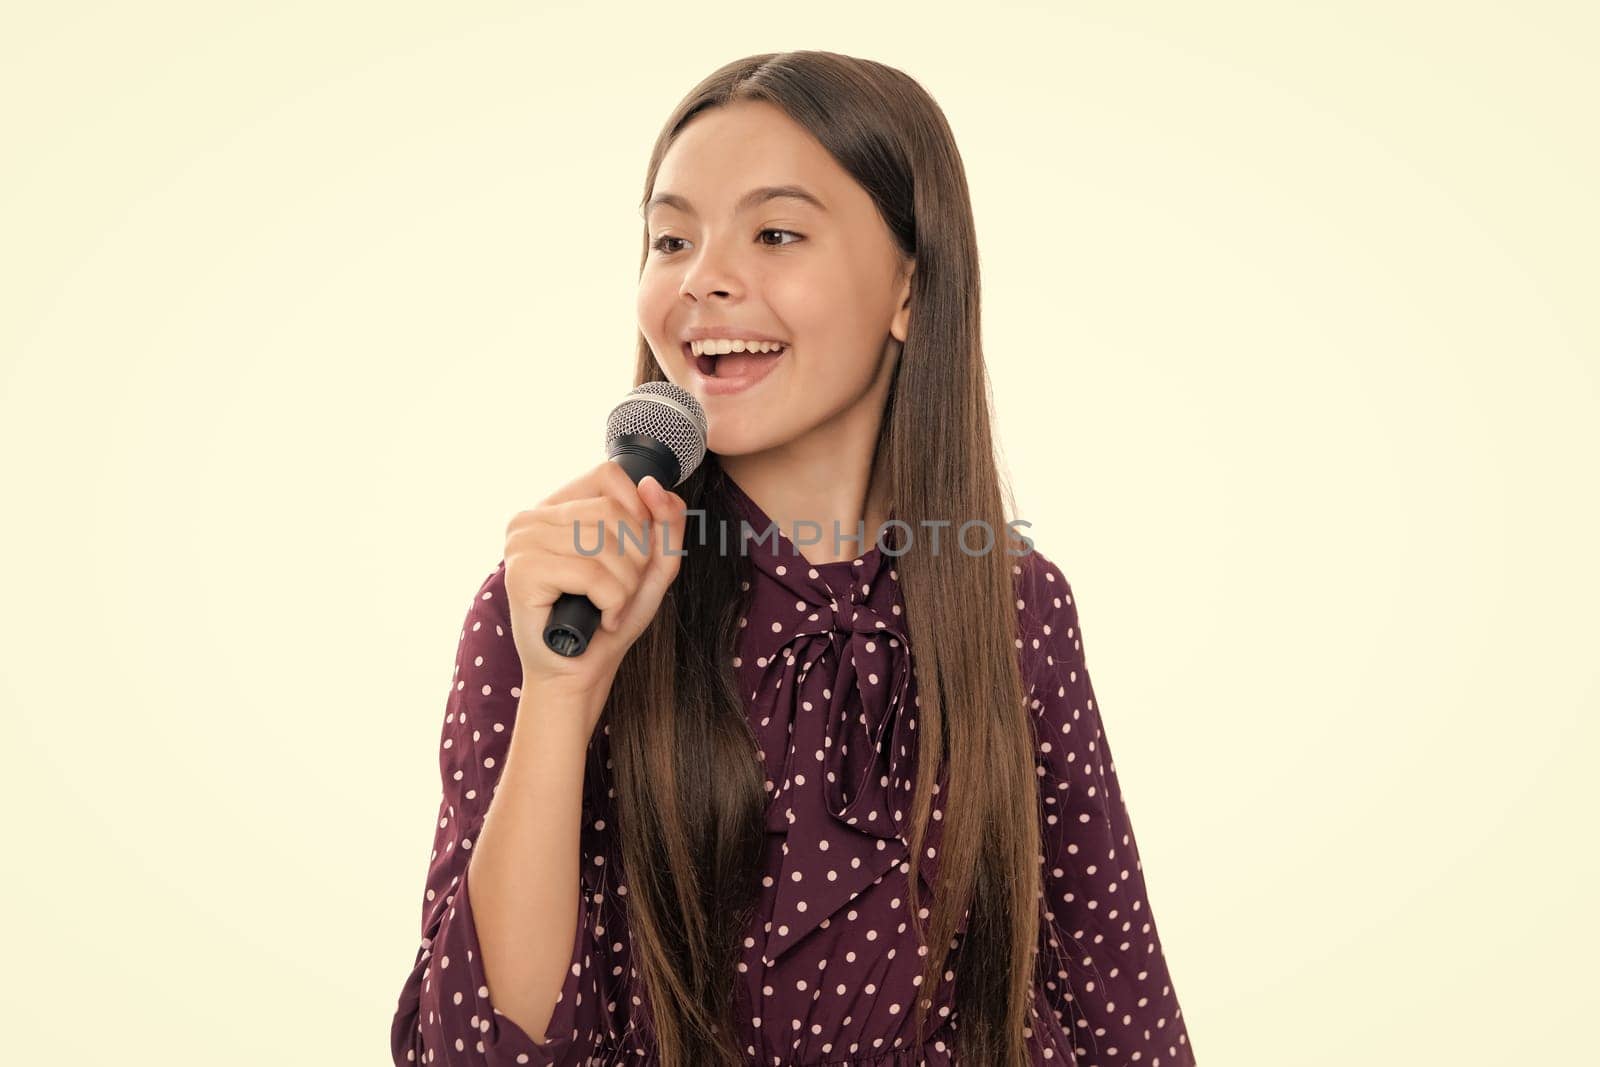 Kid singing. Emotional amazed teen girl with microphone singing against white background. Singing lovely singer girl hold microphone